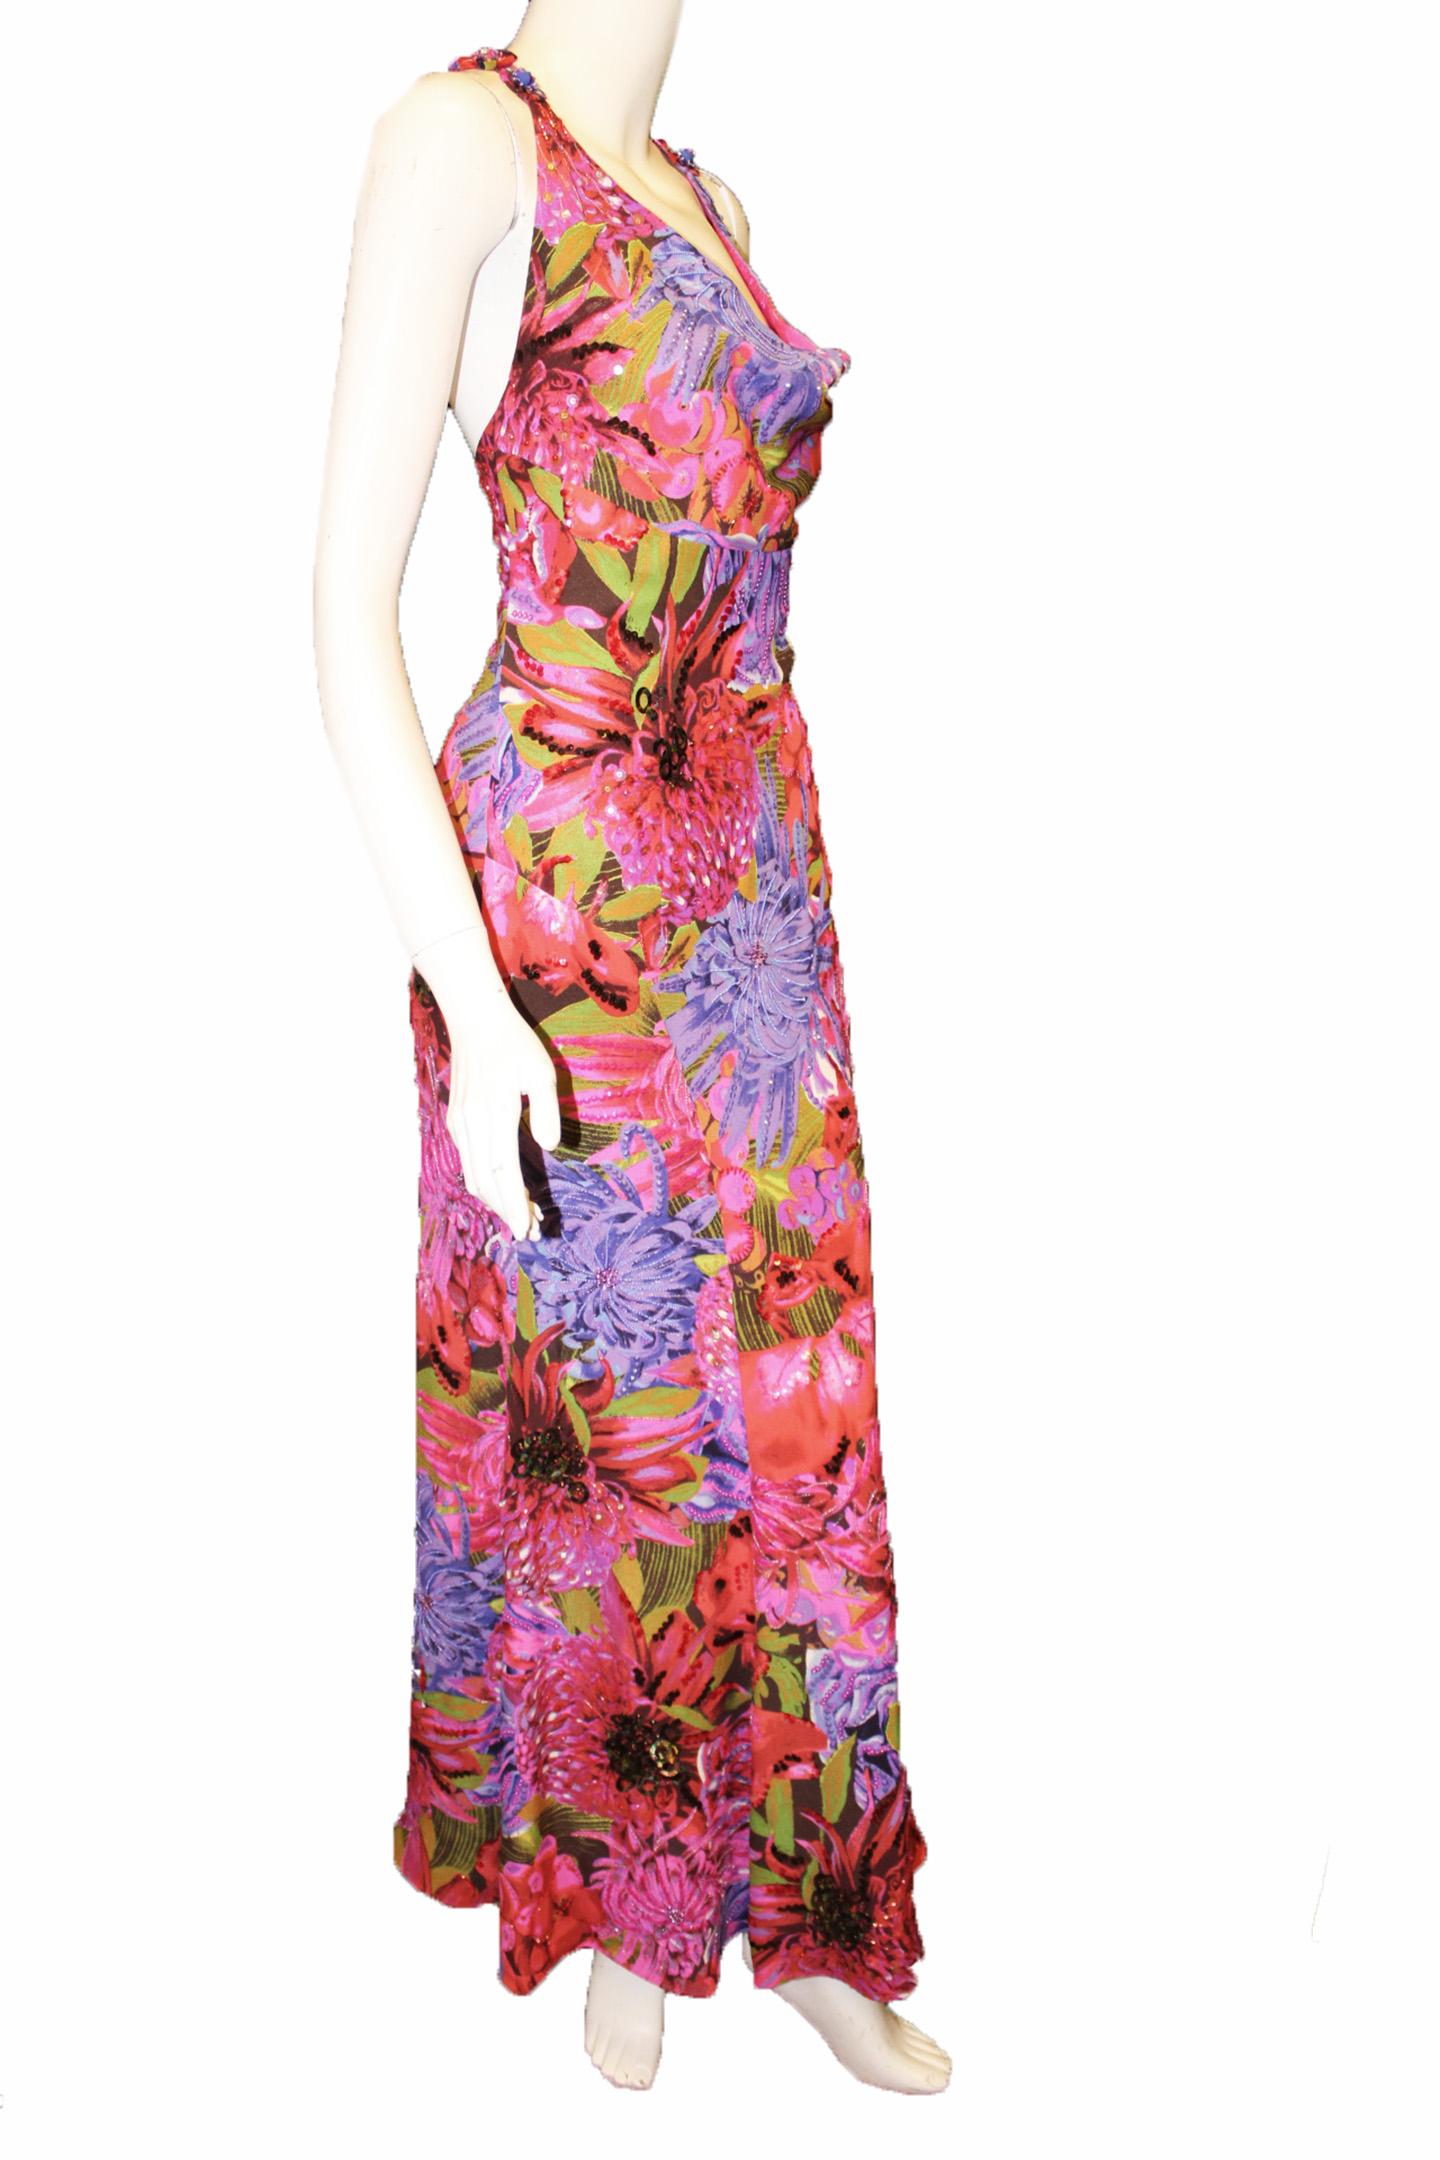 Escada pink multi color floral print dress highlighted with multi colored beads, crystals and sequins is true to the Escada workmanship.  The combination of all the different styles and sizes of beads and sequins is perfectly composed building on